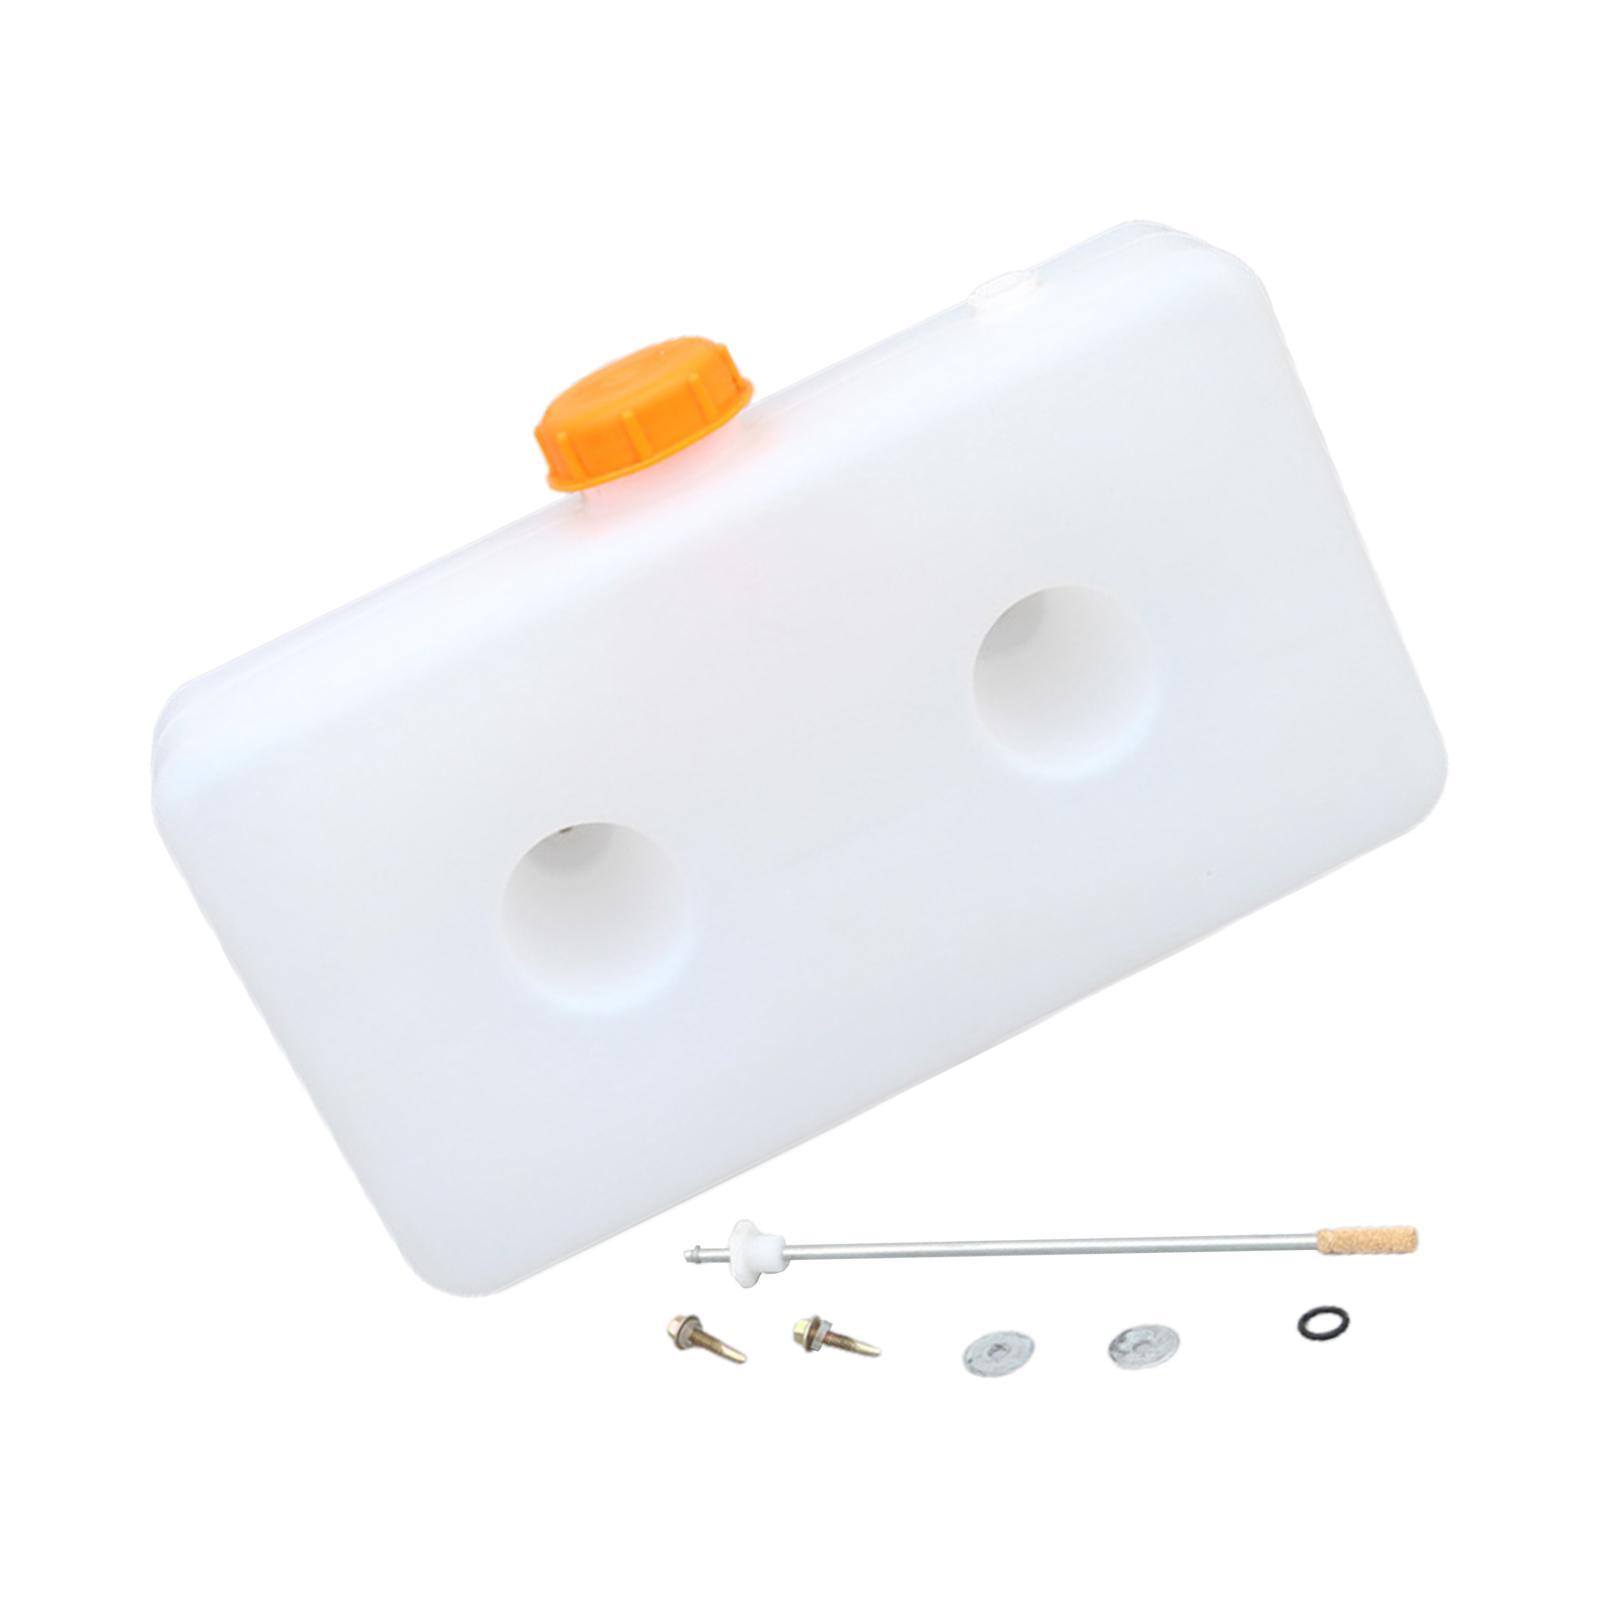 Oil Tank Plastic with Oil Extractor Oil Storage Tank Kit Fits for Automotive Car